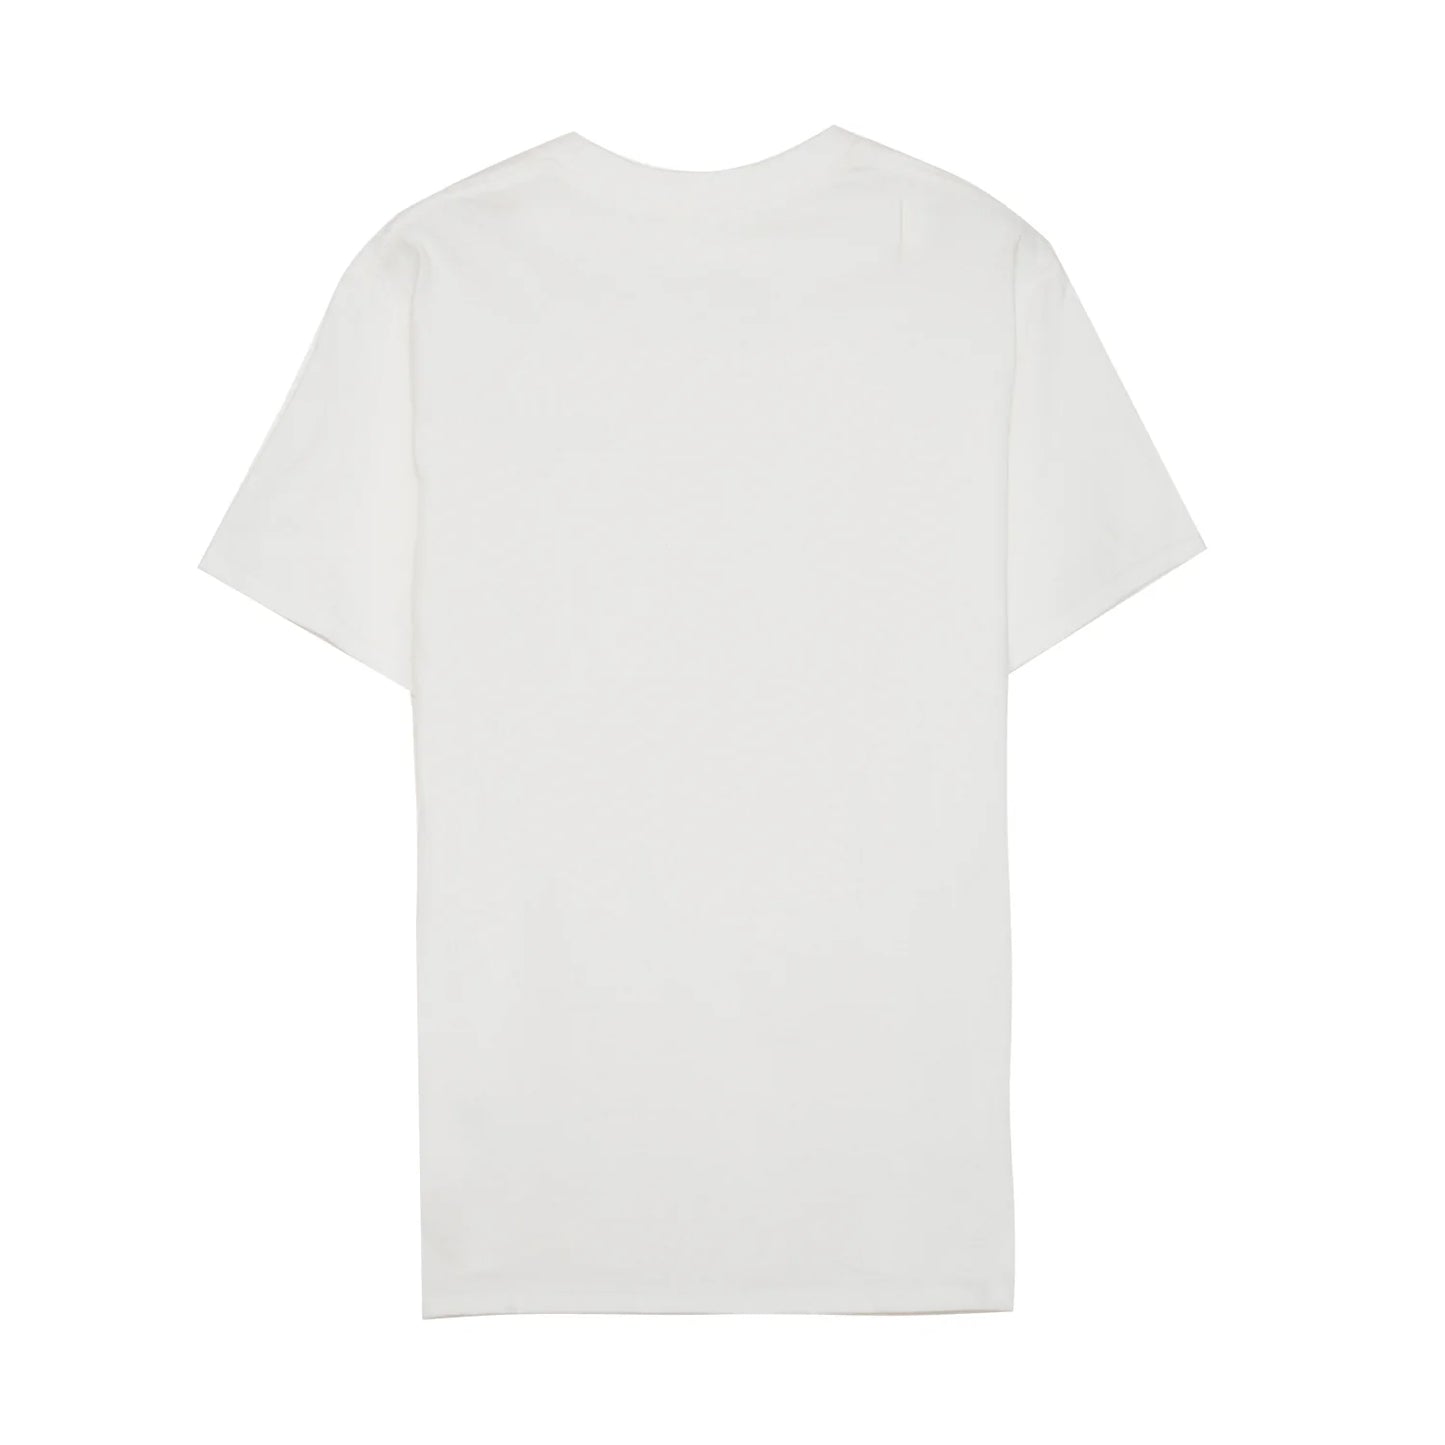 Aly Good Vibes - Goal Digger Tee (Adult Size) (White)